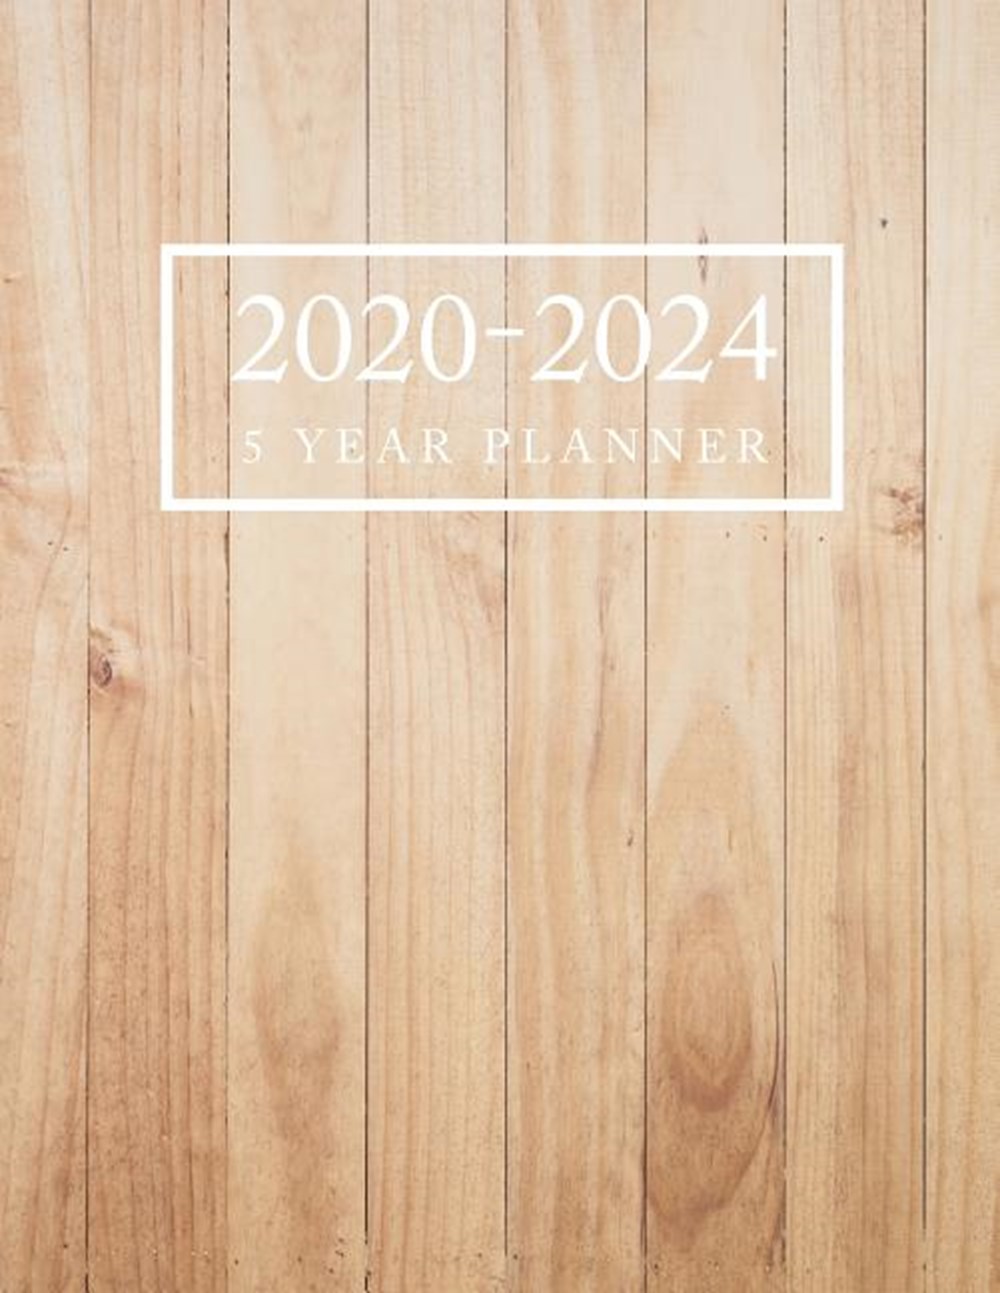 5 Year Planner 2020-2024 Wooden Cover - 5 Year Monthly Appointment Calendar with Holiday - 2020-2024